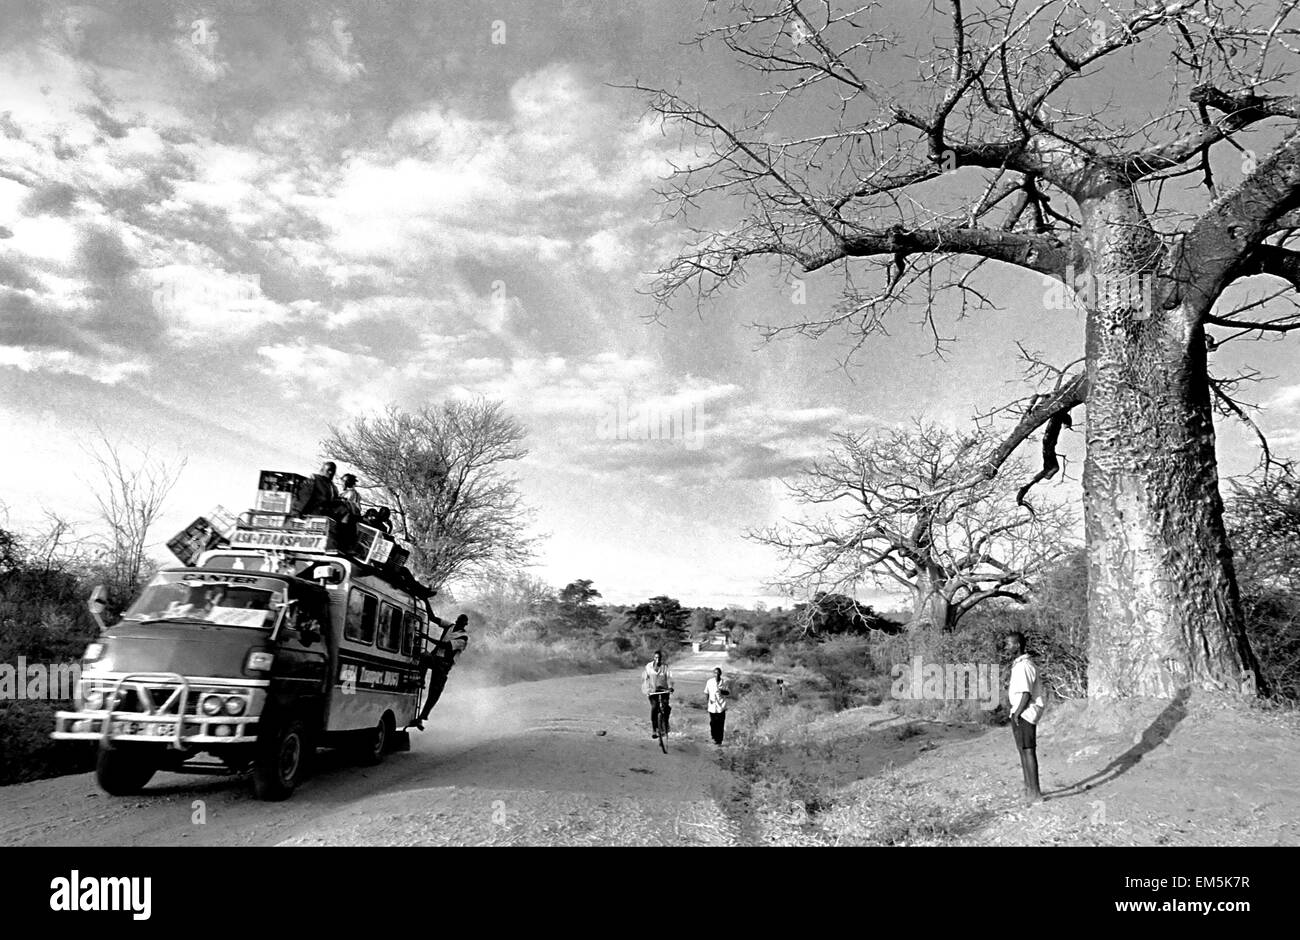 A matatu heavily loaded and a baobab in a dusty road in rural Kenya. Landscape. The infrastructure in Kenya are very poor. The r Stock Photo